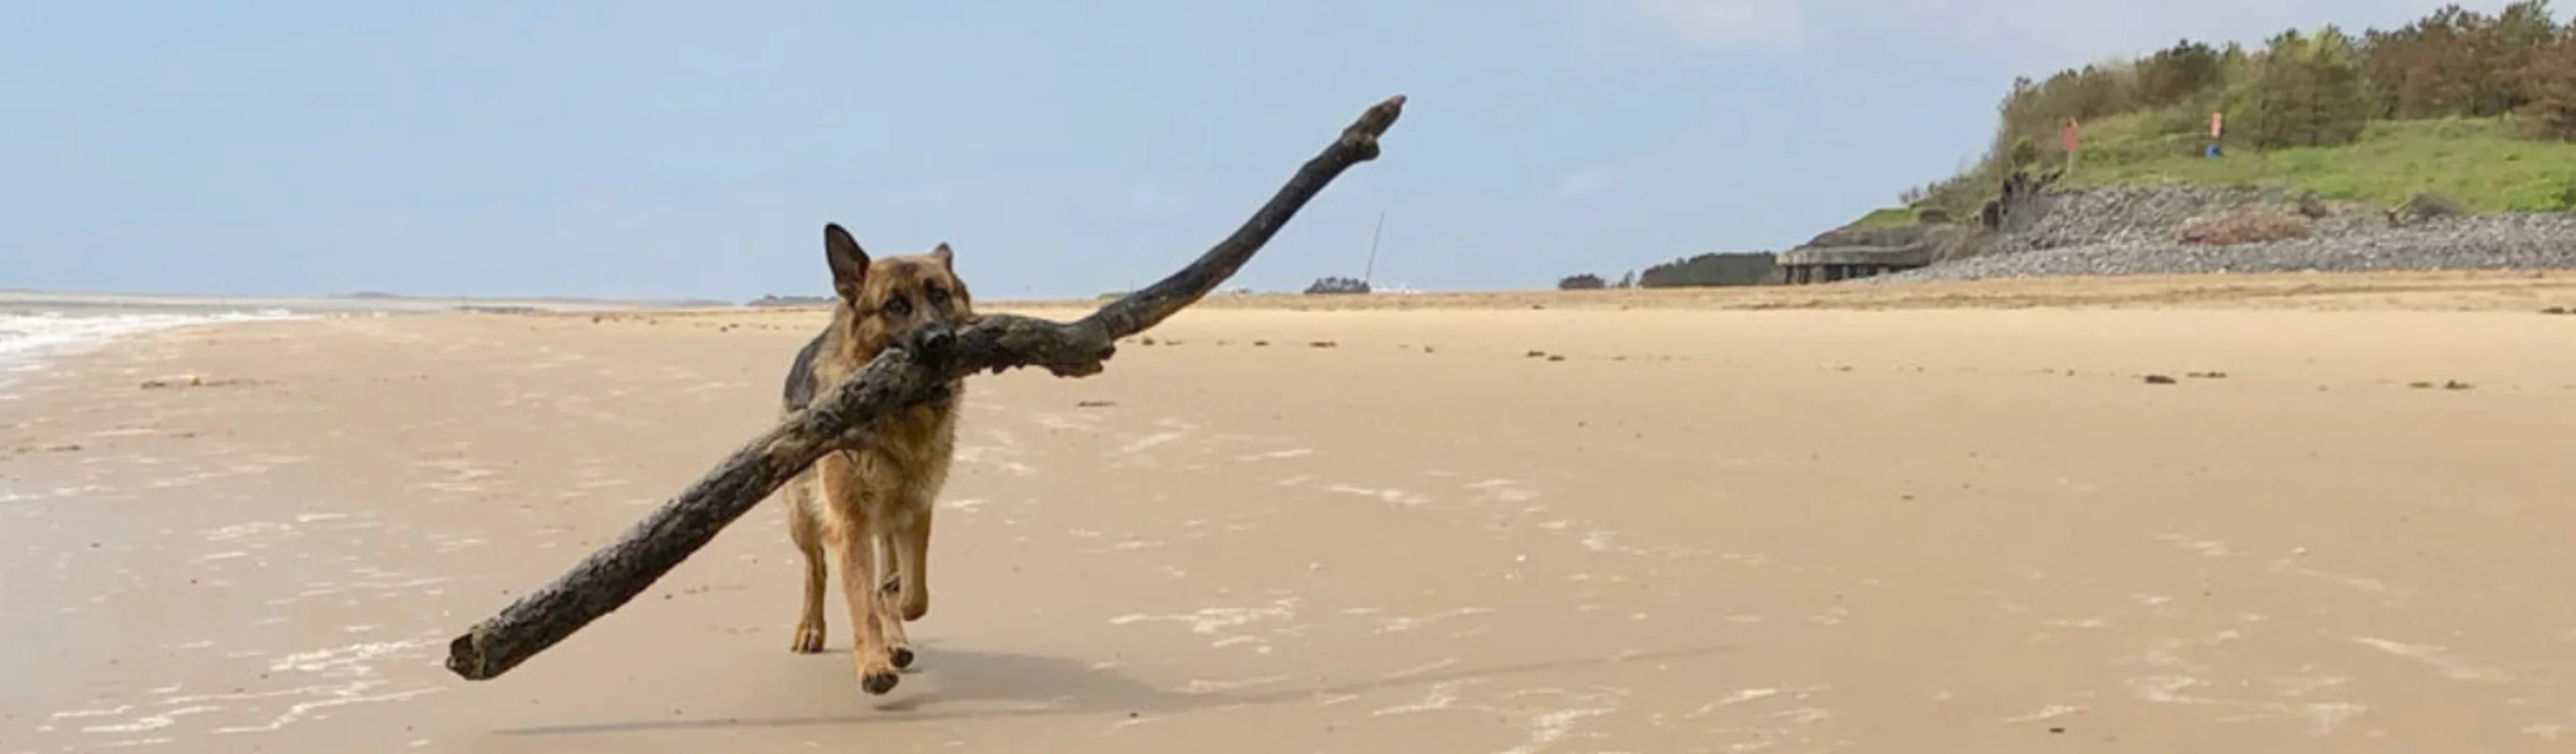 Dog Holding a Stick at the Beach